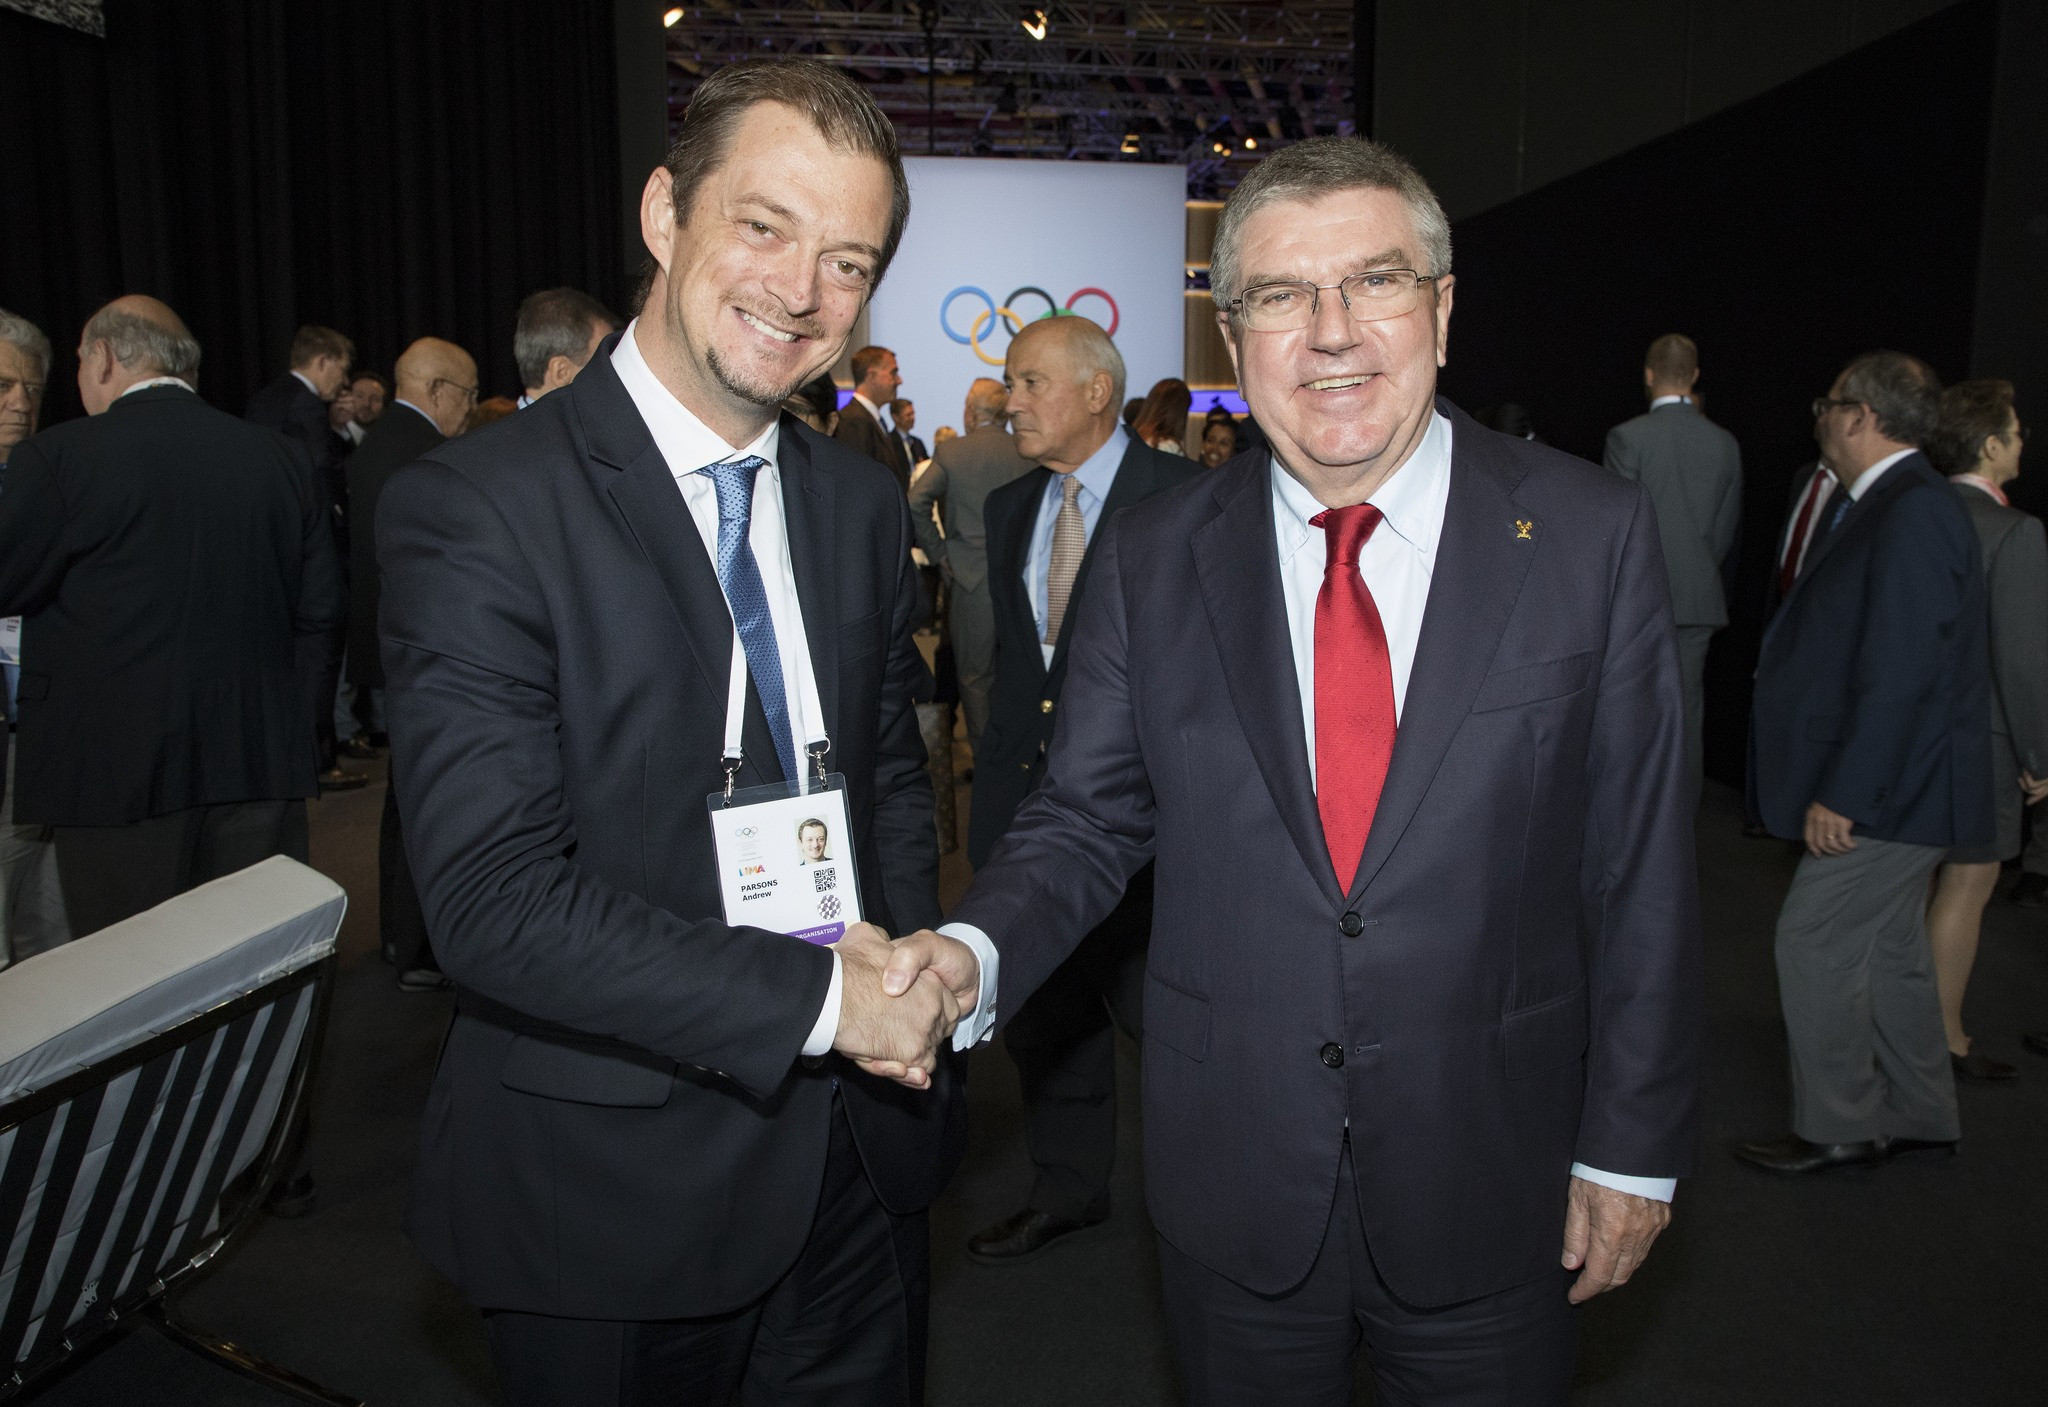 Newly elected IPC President Andrew Parsons was greeted by IOC President Thomas Bach ©IOC